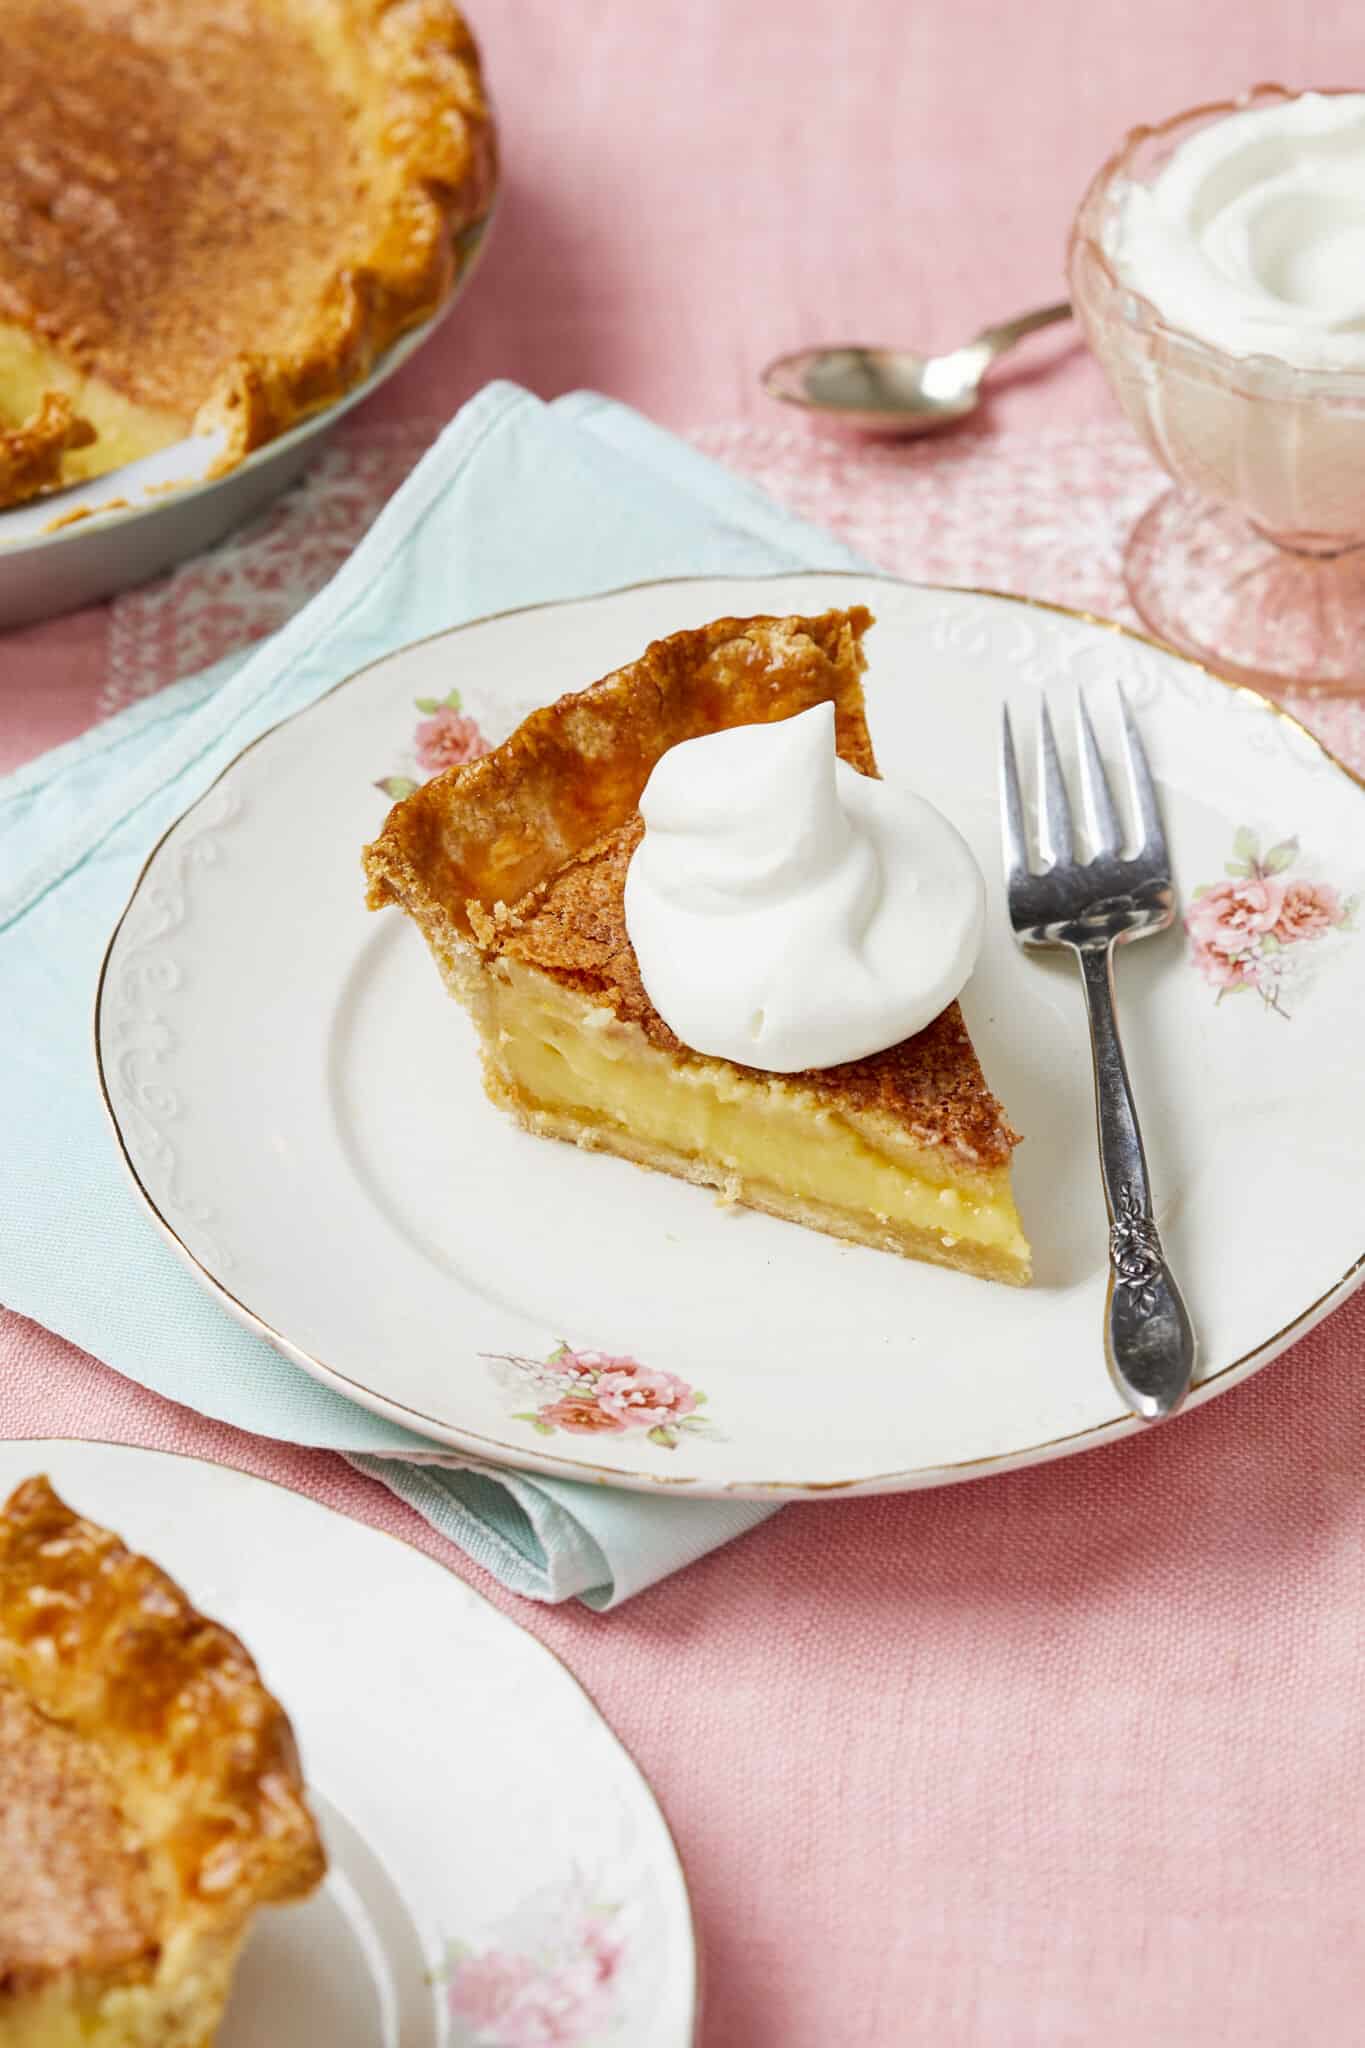 Two slices of the Classic Chess Pie are served on golden-rim dessert plates. The slice has flaky crust, silky filling, and crispy caramelized topping crowned with a big dollop of whipped cream. 

The rest of the pie is in the pie pan on the side. Extra whipped cream is served in a pink great depression glass cup. 